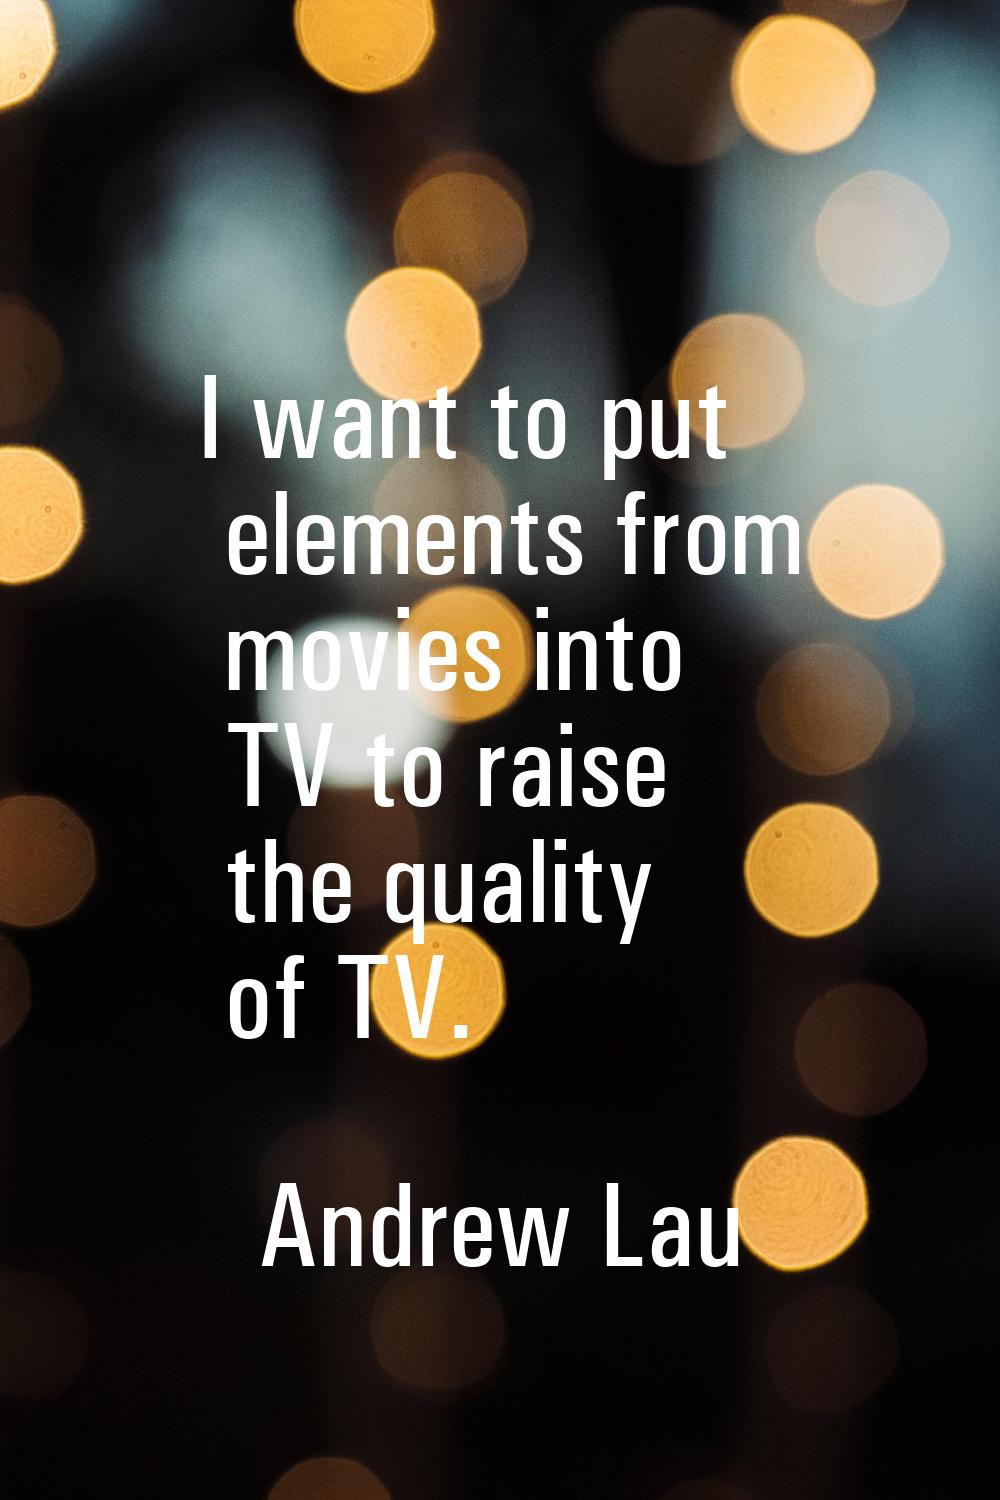 I want to put elements from movies into TV to raise the quality of TV.